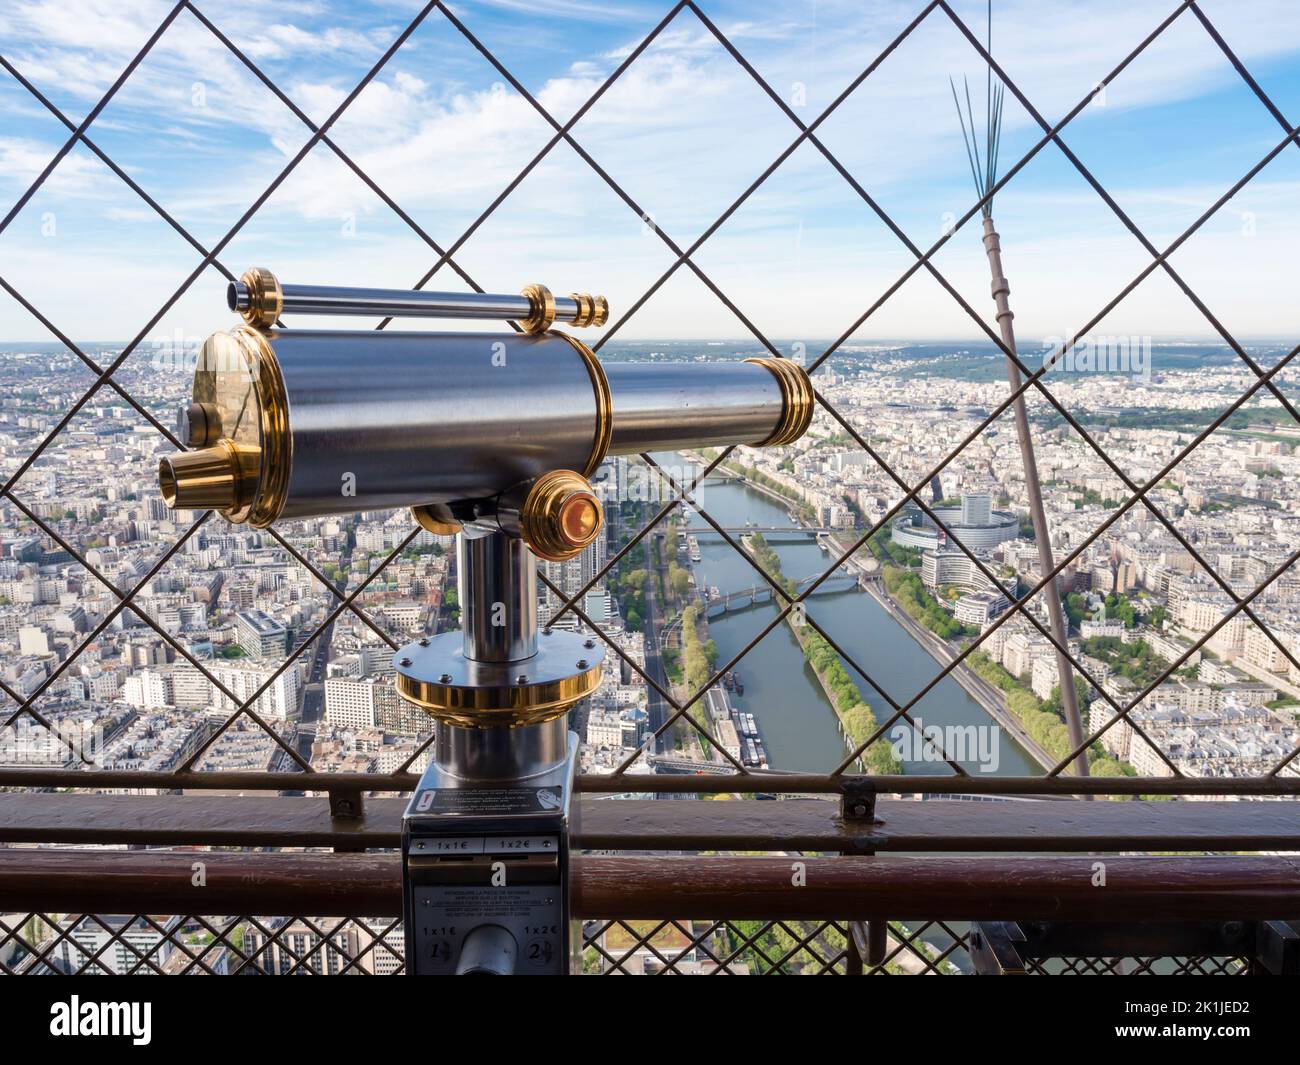 Paris, France - 18 April 2022: One of the coin-operated vintage telescopes at the observation platform on top of Eiffel tower. Stock Photo